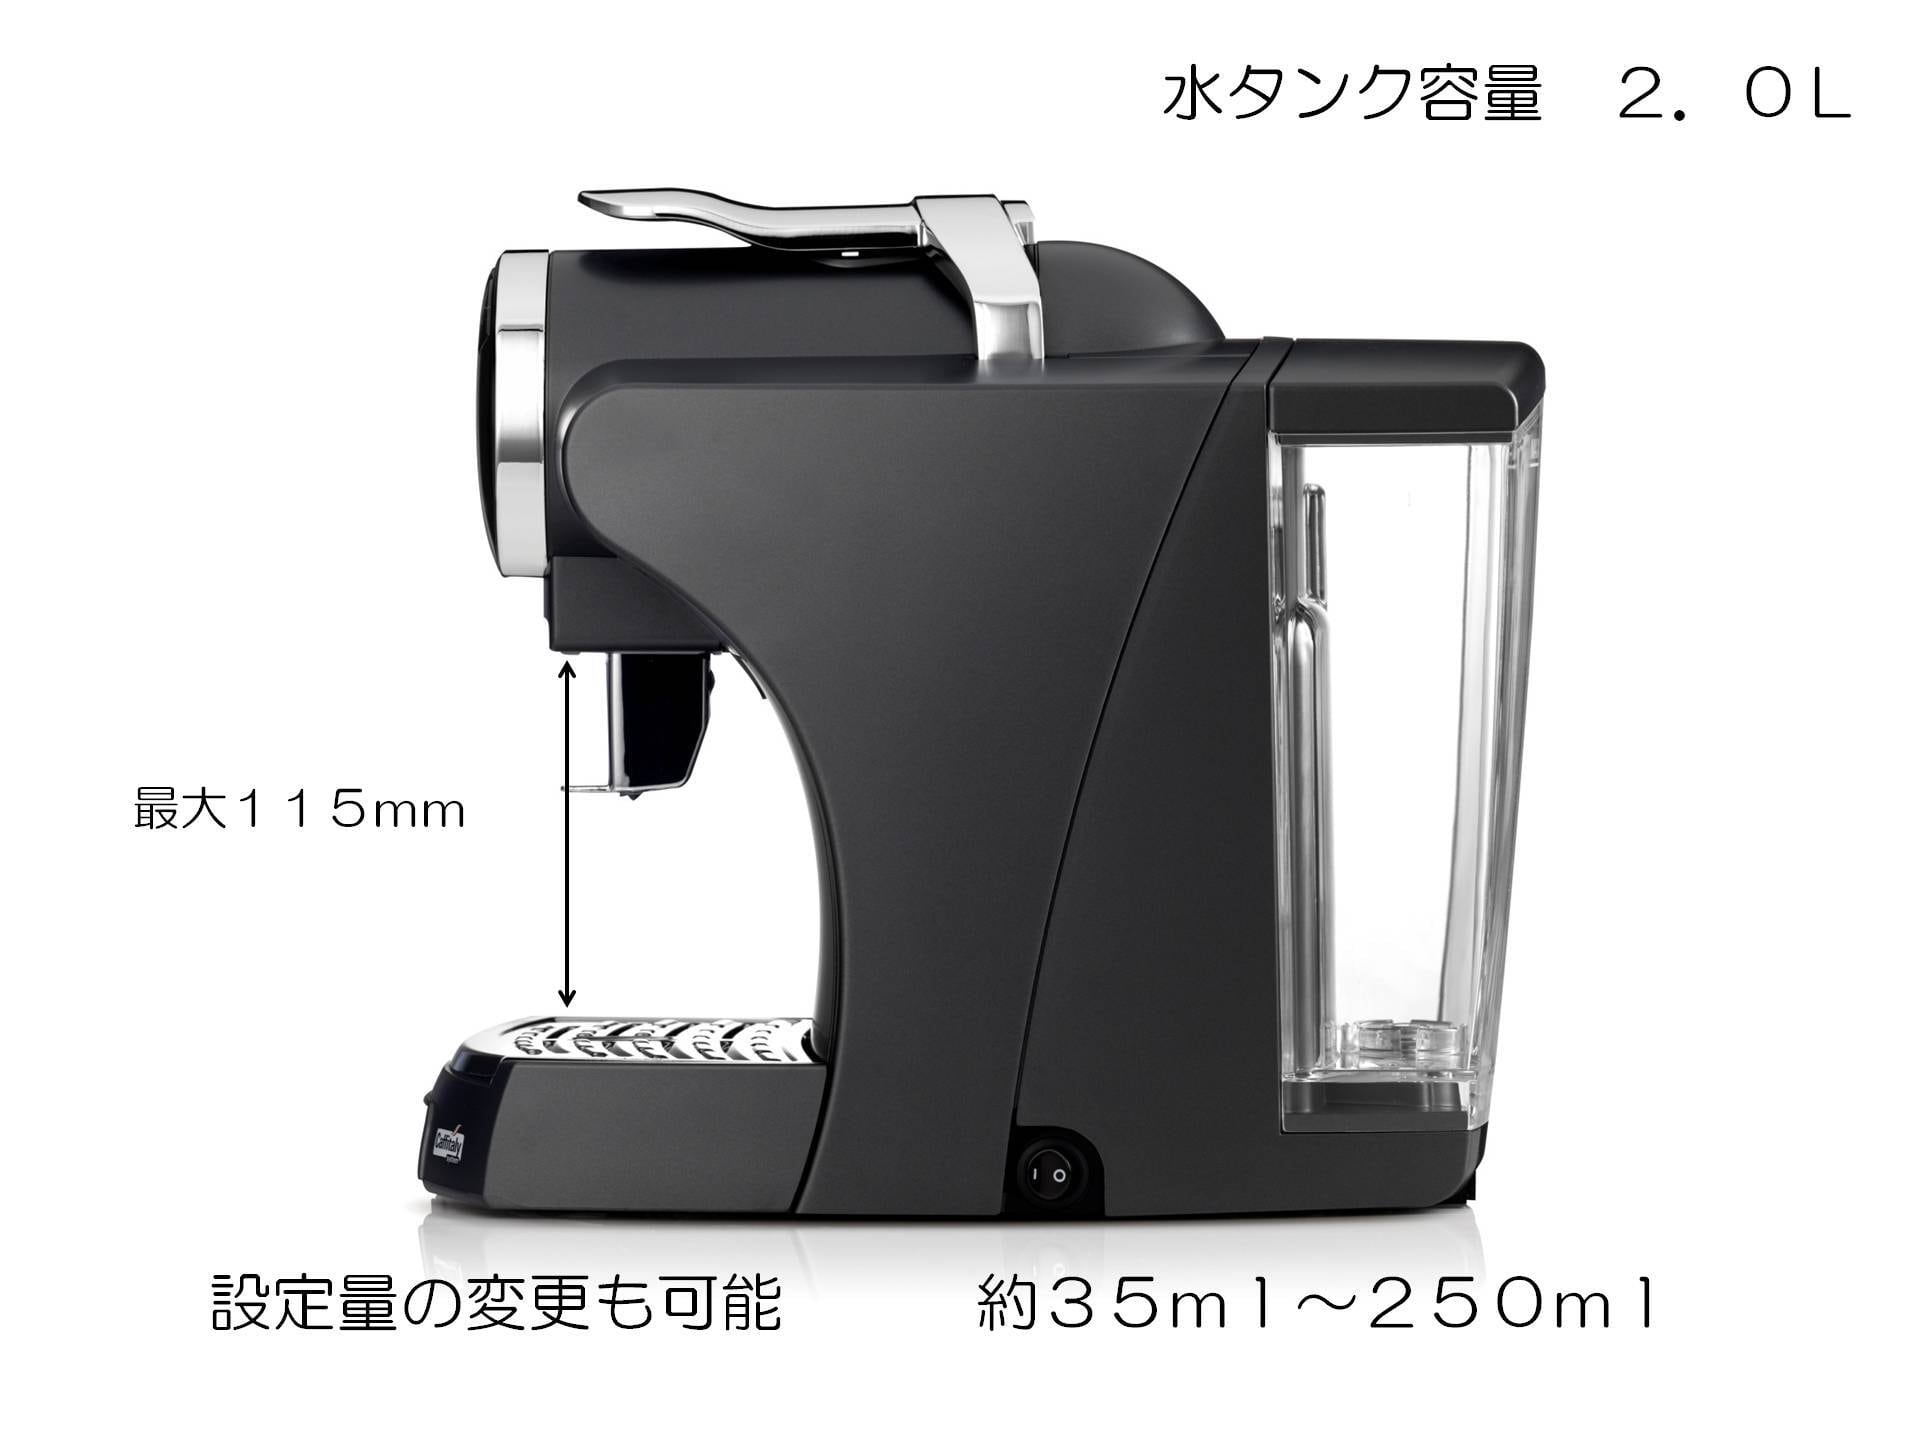 Single Cup Coffee Maker for Keurig K Cups By Mixpresso by Mixpresso Coffee  [並行輸入品] 通販